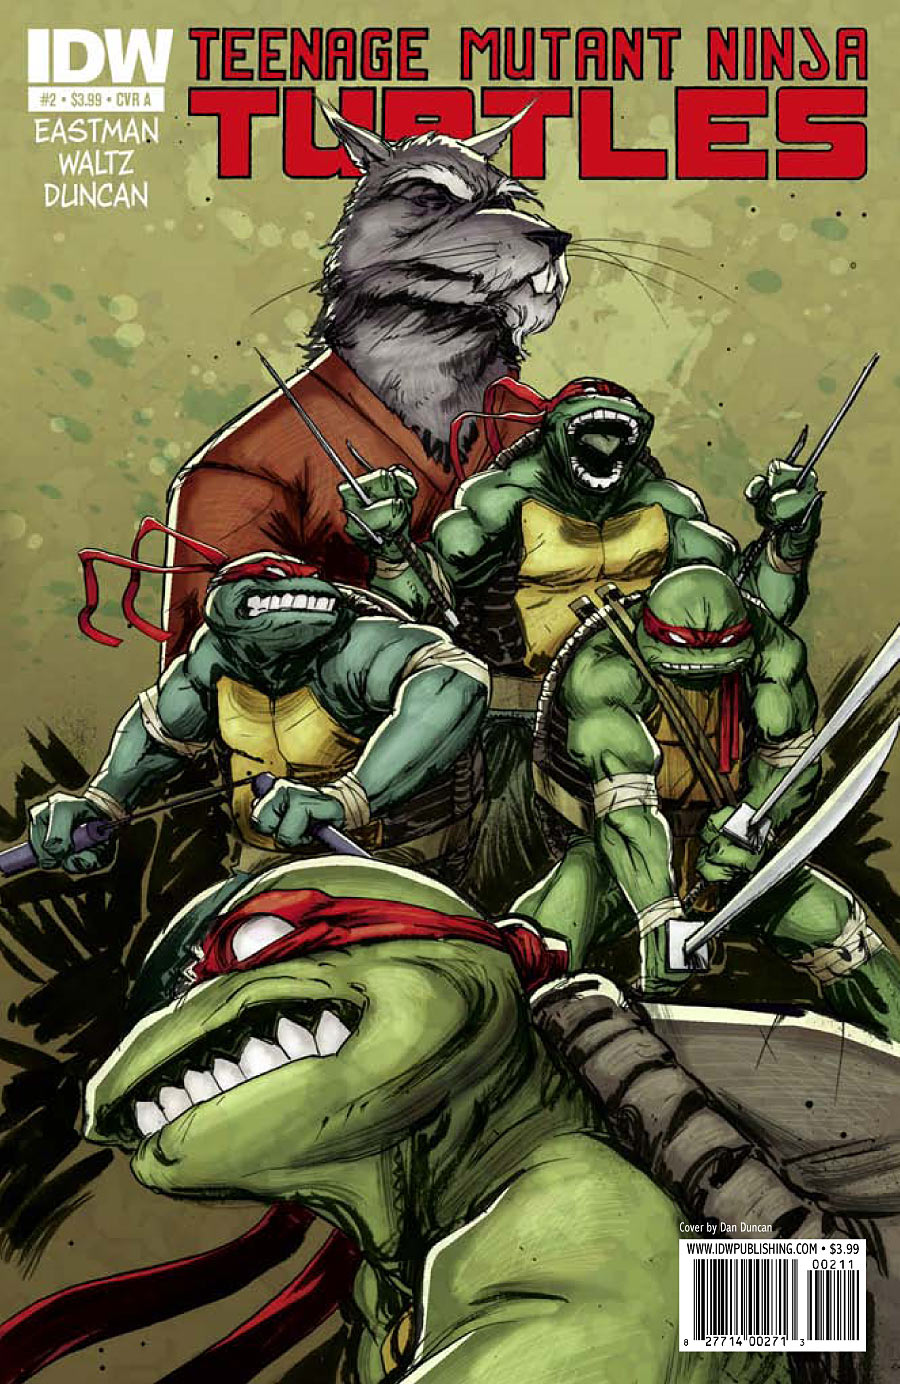 TMNT_IDW_no_2_cover